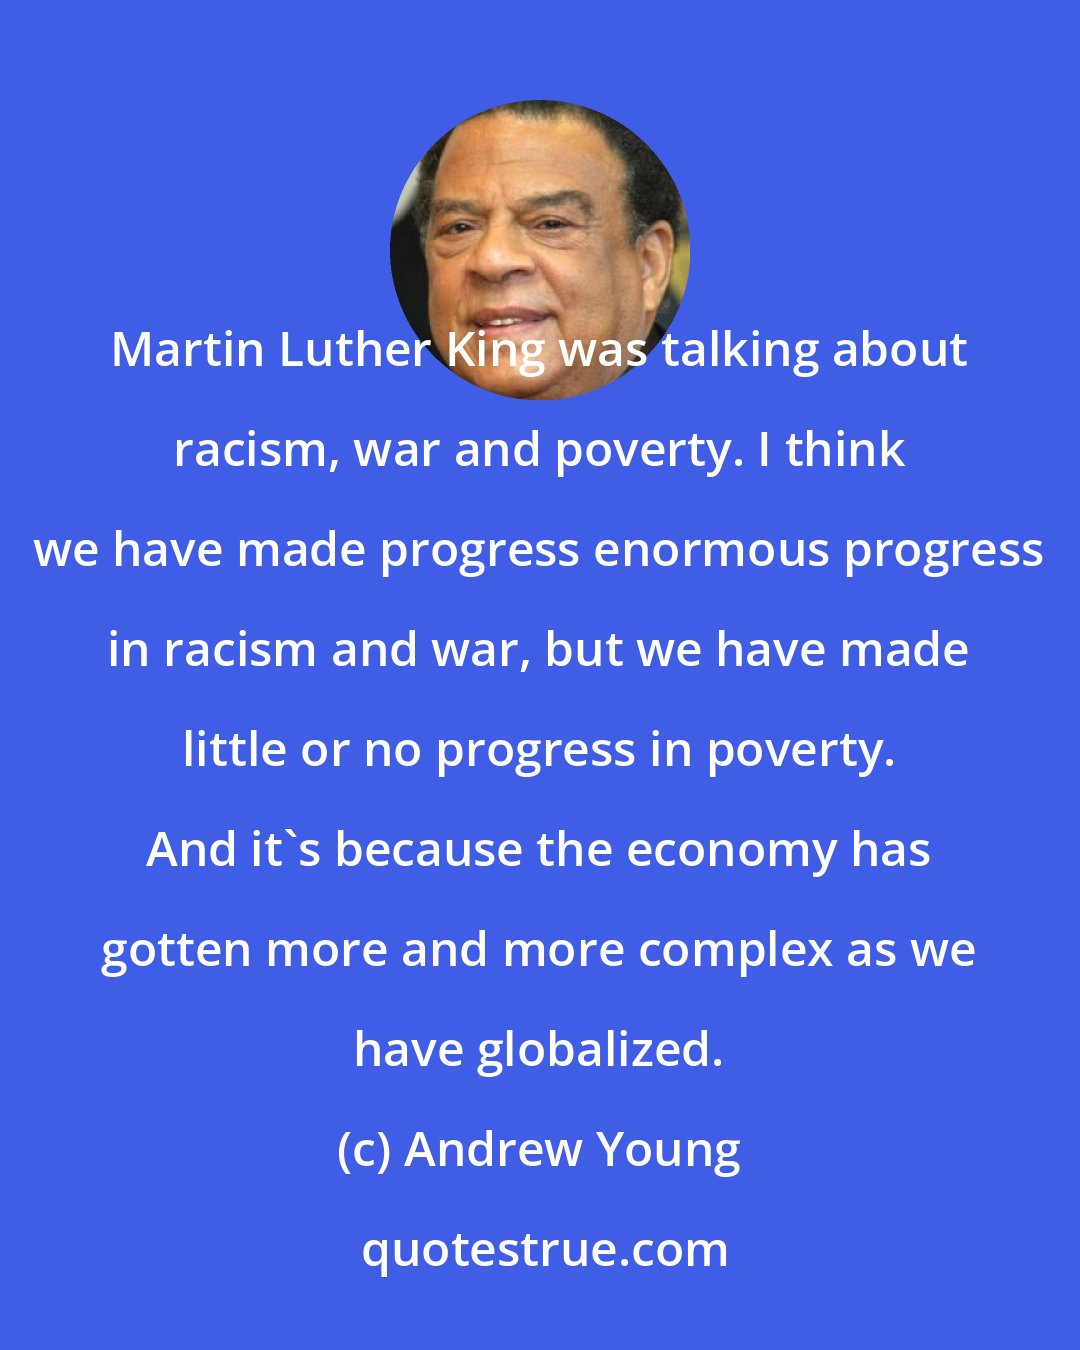 Andrew Young: Martin Luther King was talking about racism, war and poverty. I think we have made progress enormous progress in racism and war, but we have made little or no progress in poverty. And it's because the economy has gotten more and more complex as we have globalized.